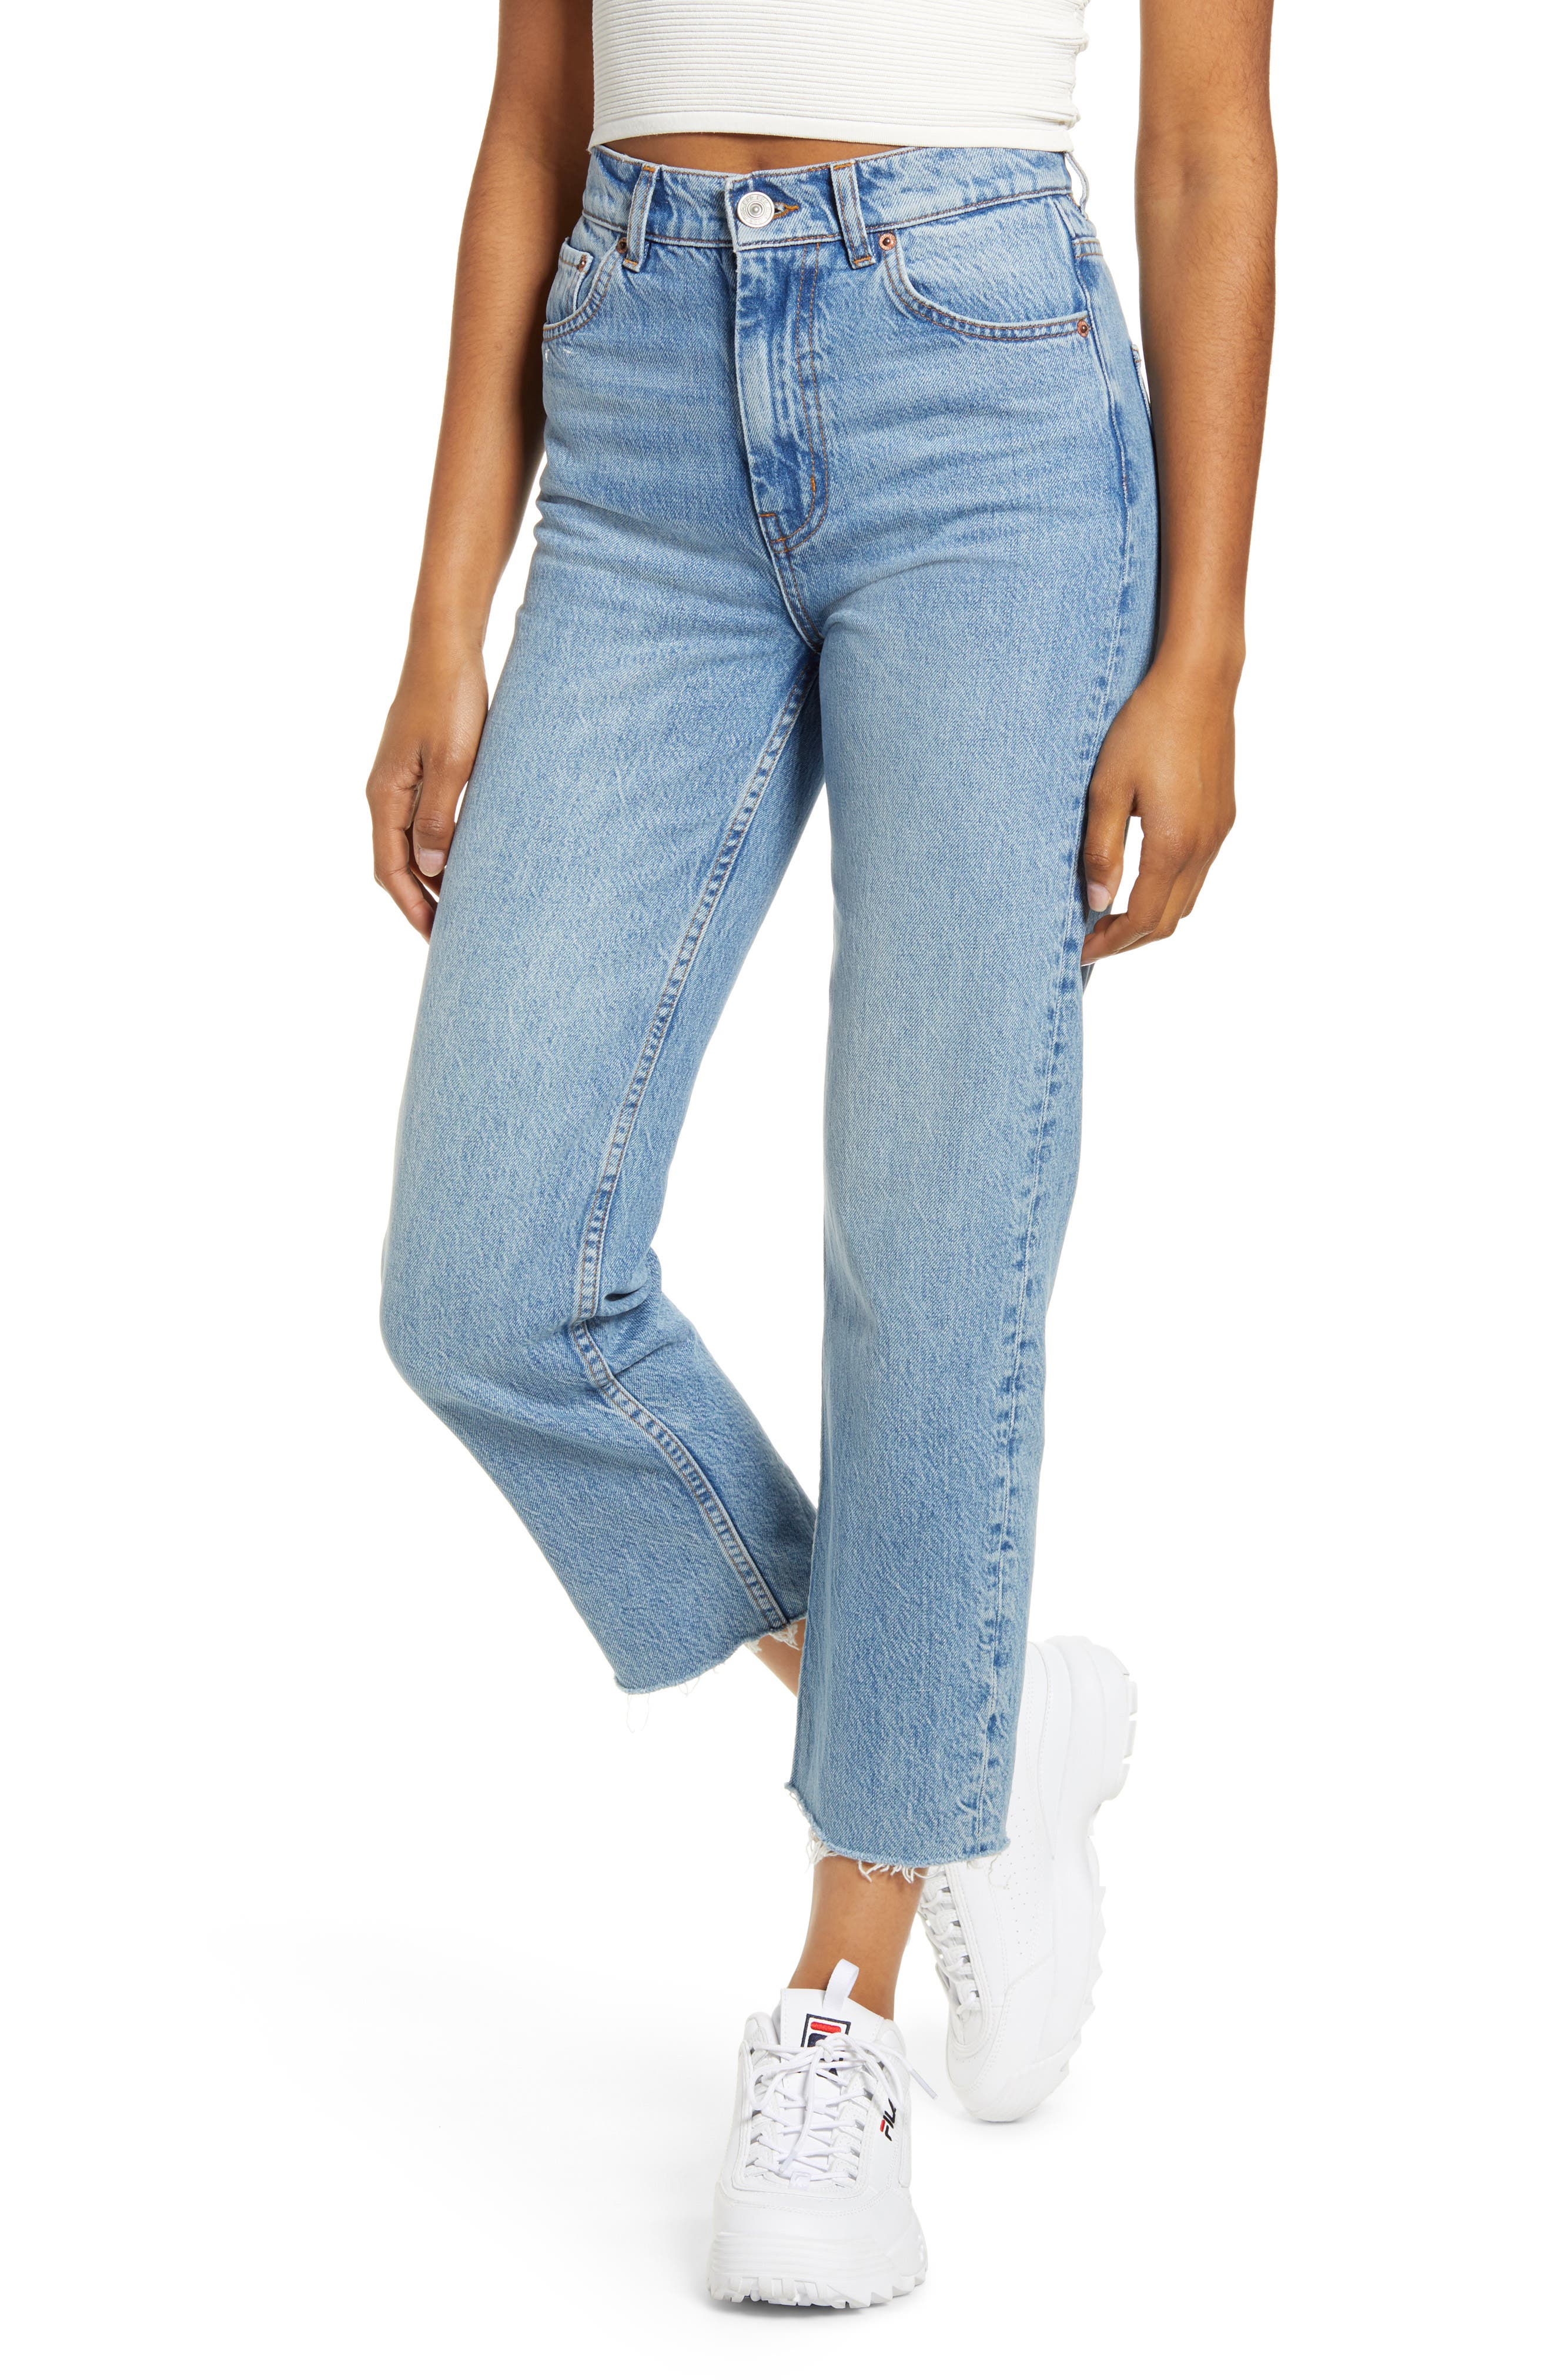 urban outfitter jeans